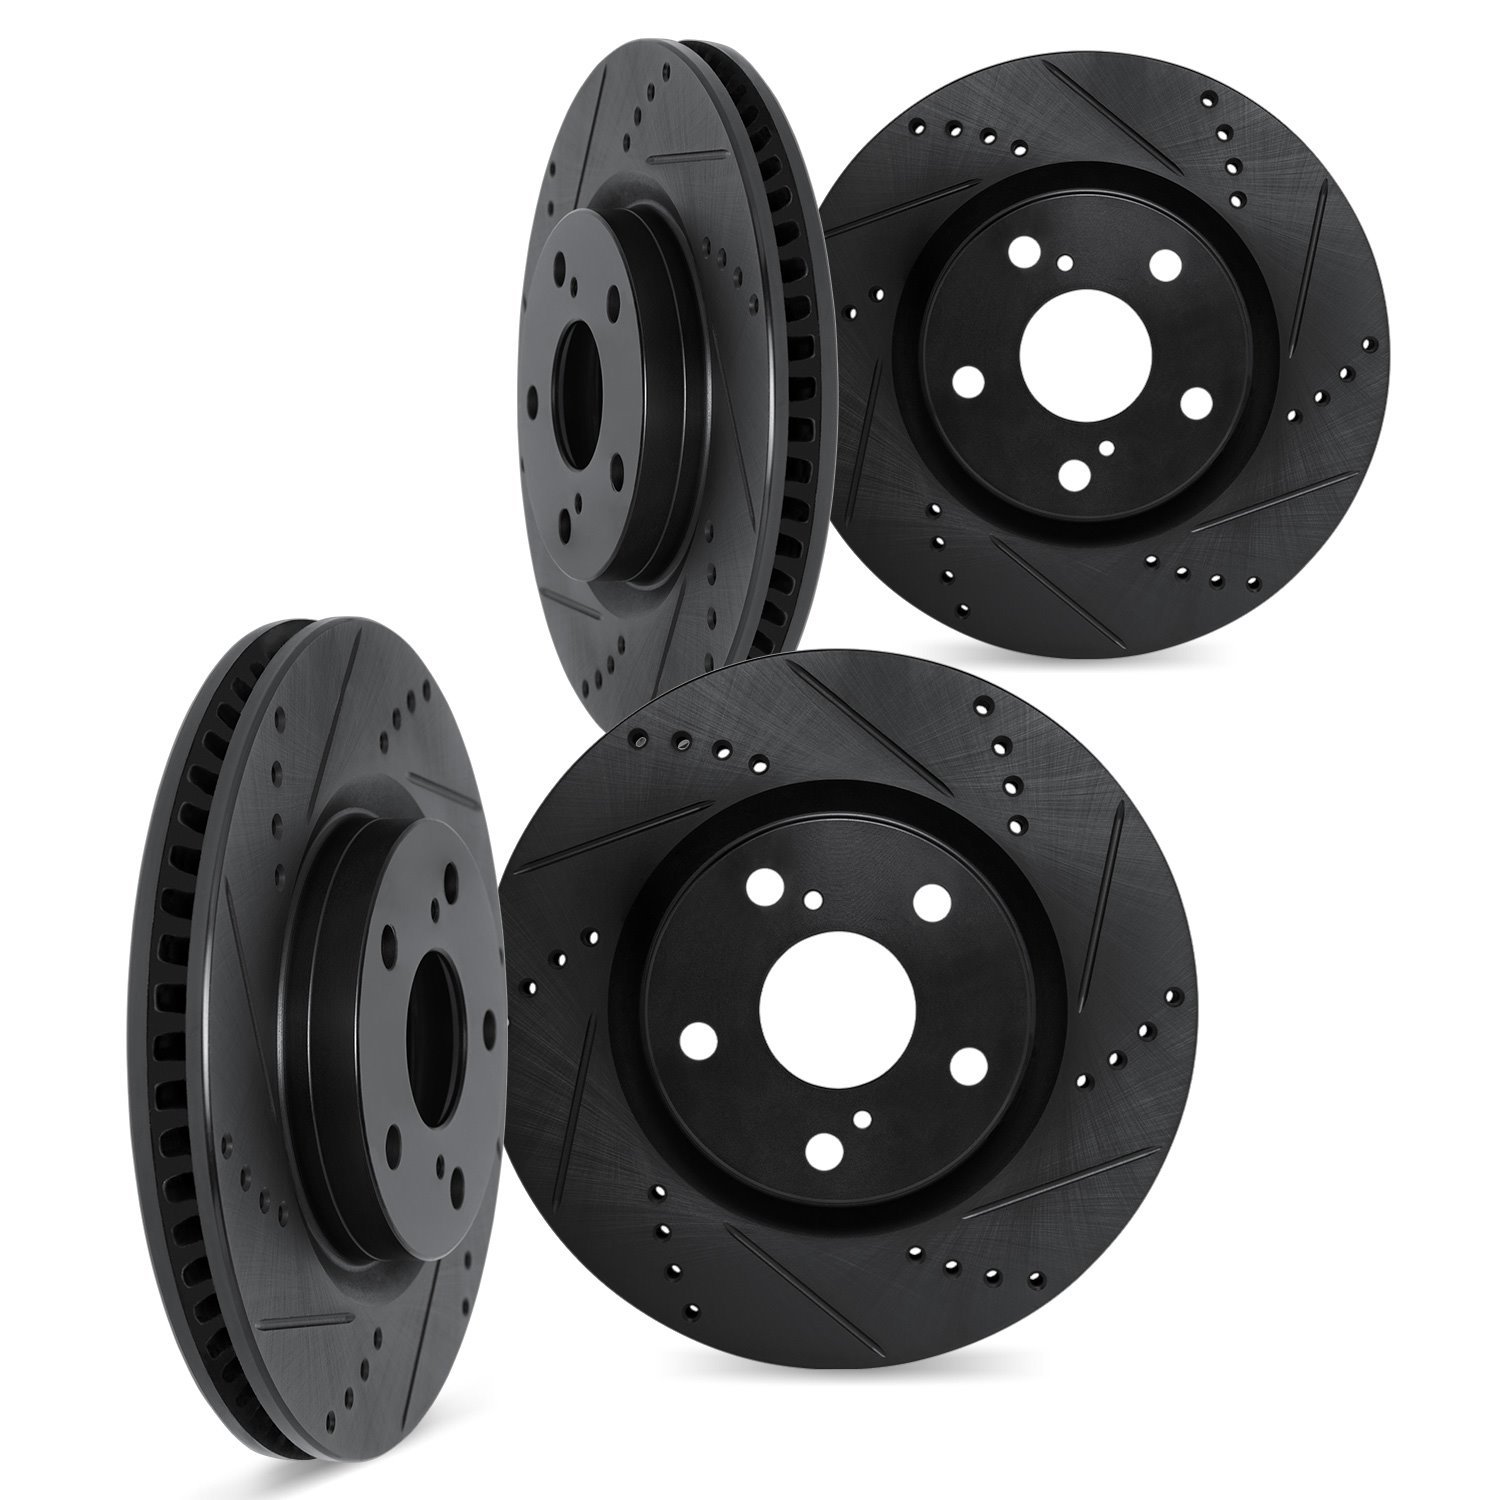 8004-76019 Drilled/Slotted Brake Rotors [Black], Fits Select Lexus/Toyota/Scion, Position: Front and Rear